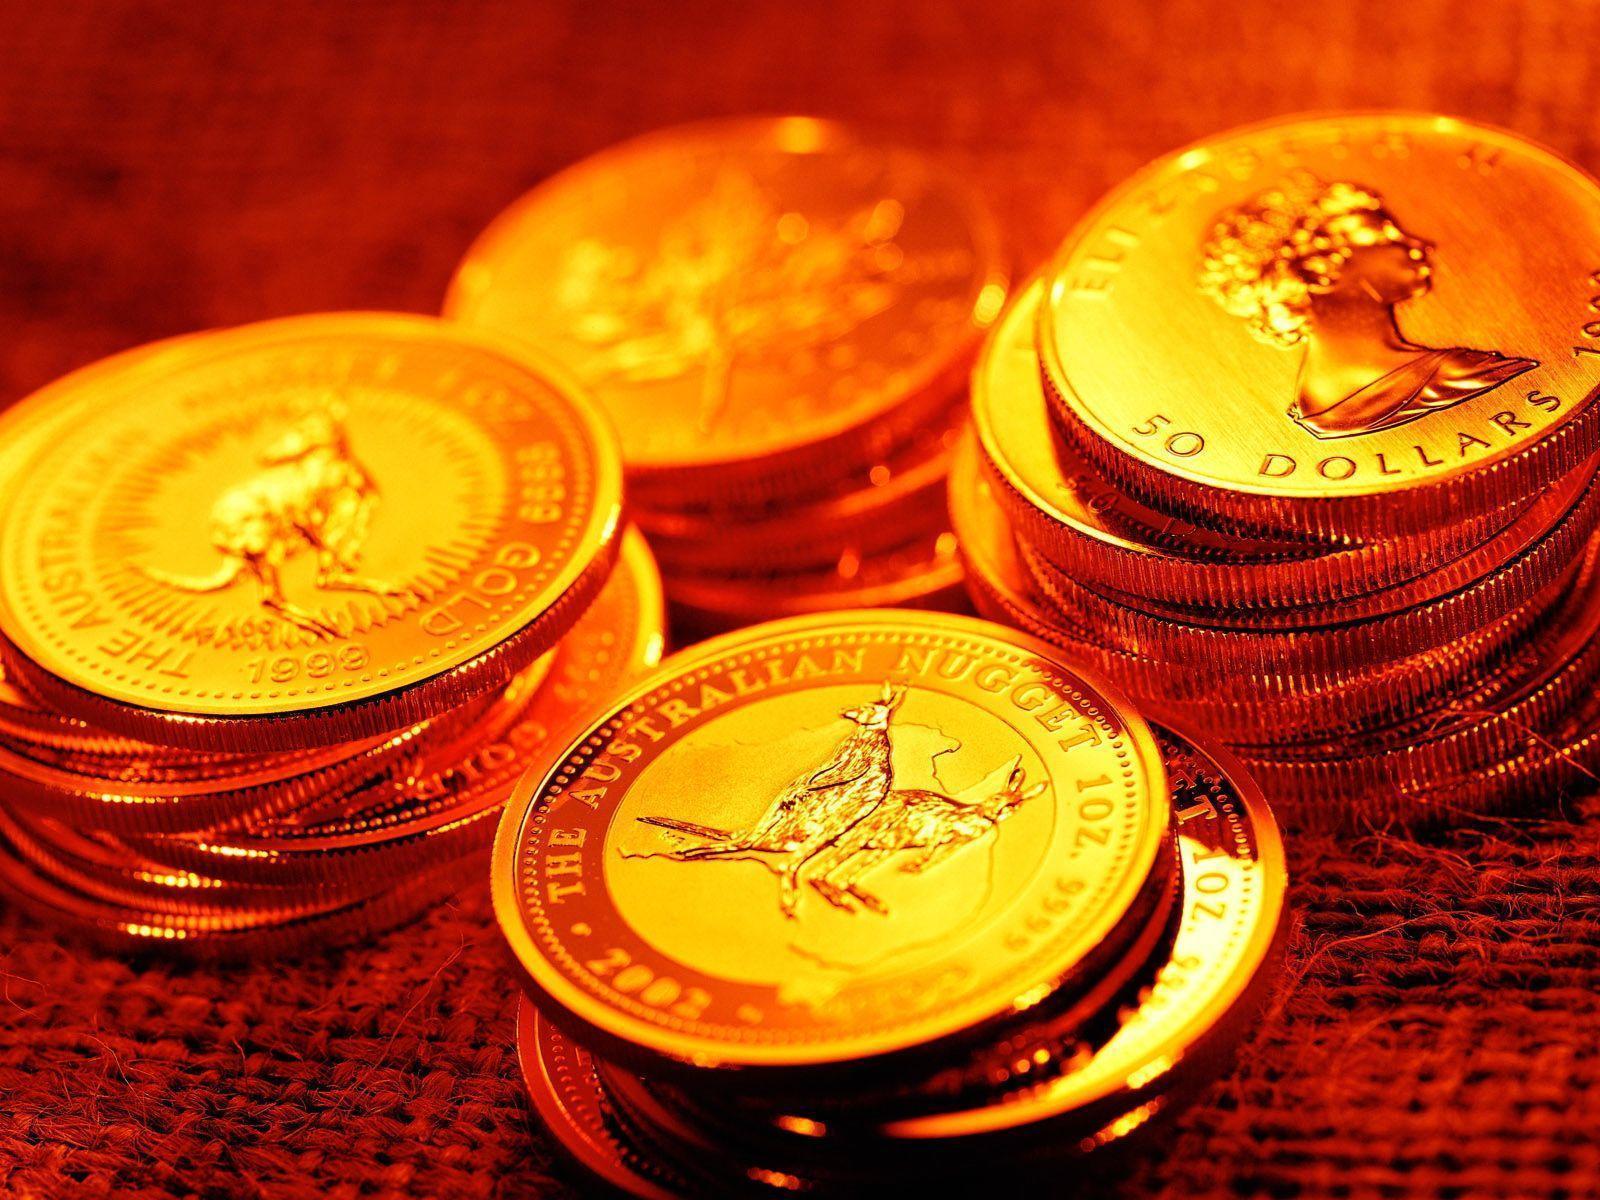 Australian gold coins wallpaper and image, picture